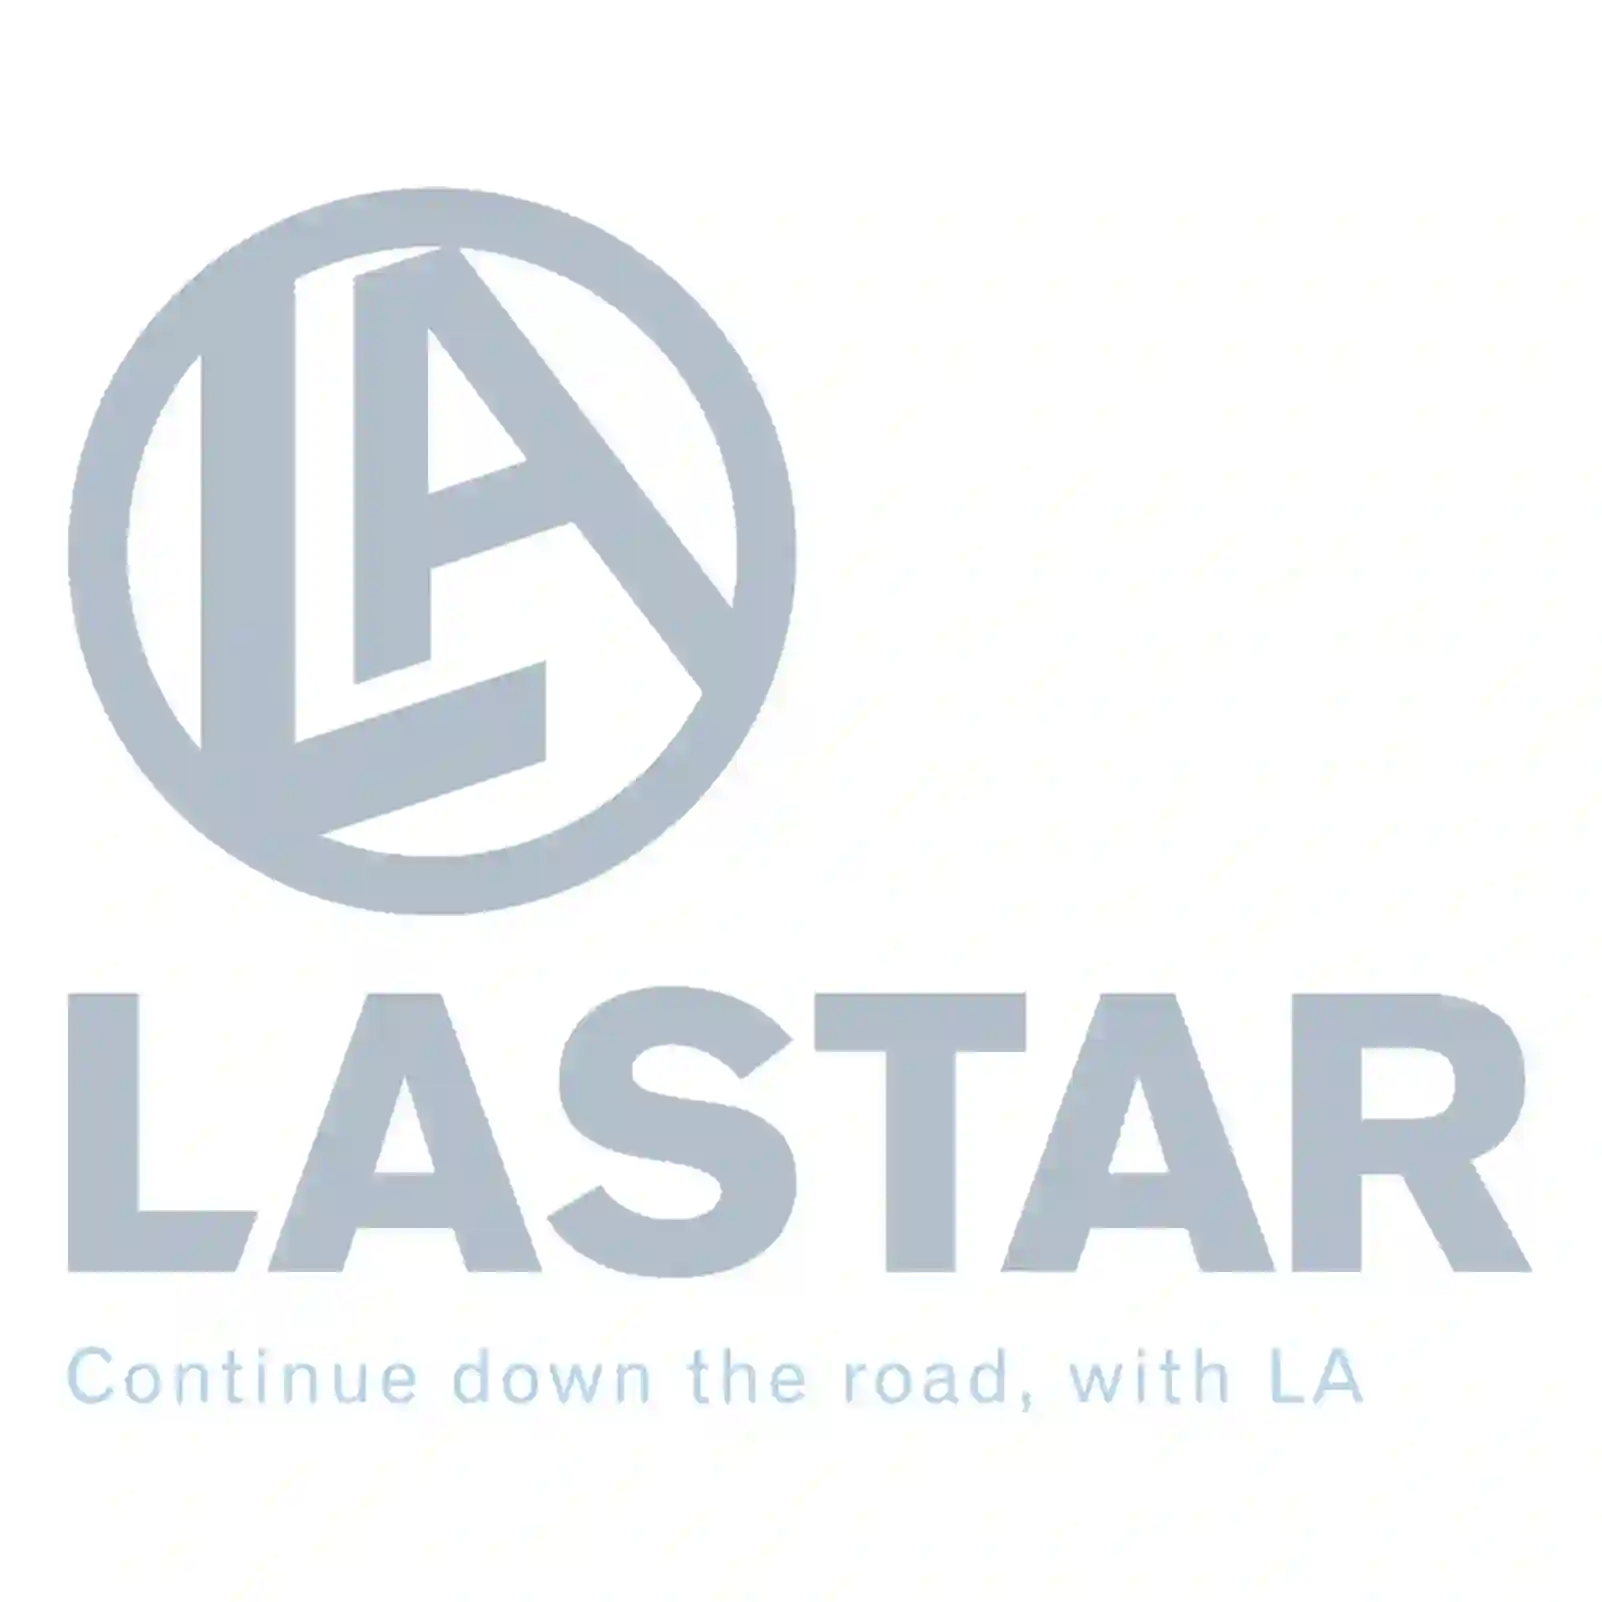  Turn signal lamp, lateral, transparent || Lastar Spare Part | Truck Spare Parts, Auotomotive Spare Parts